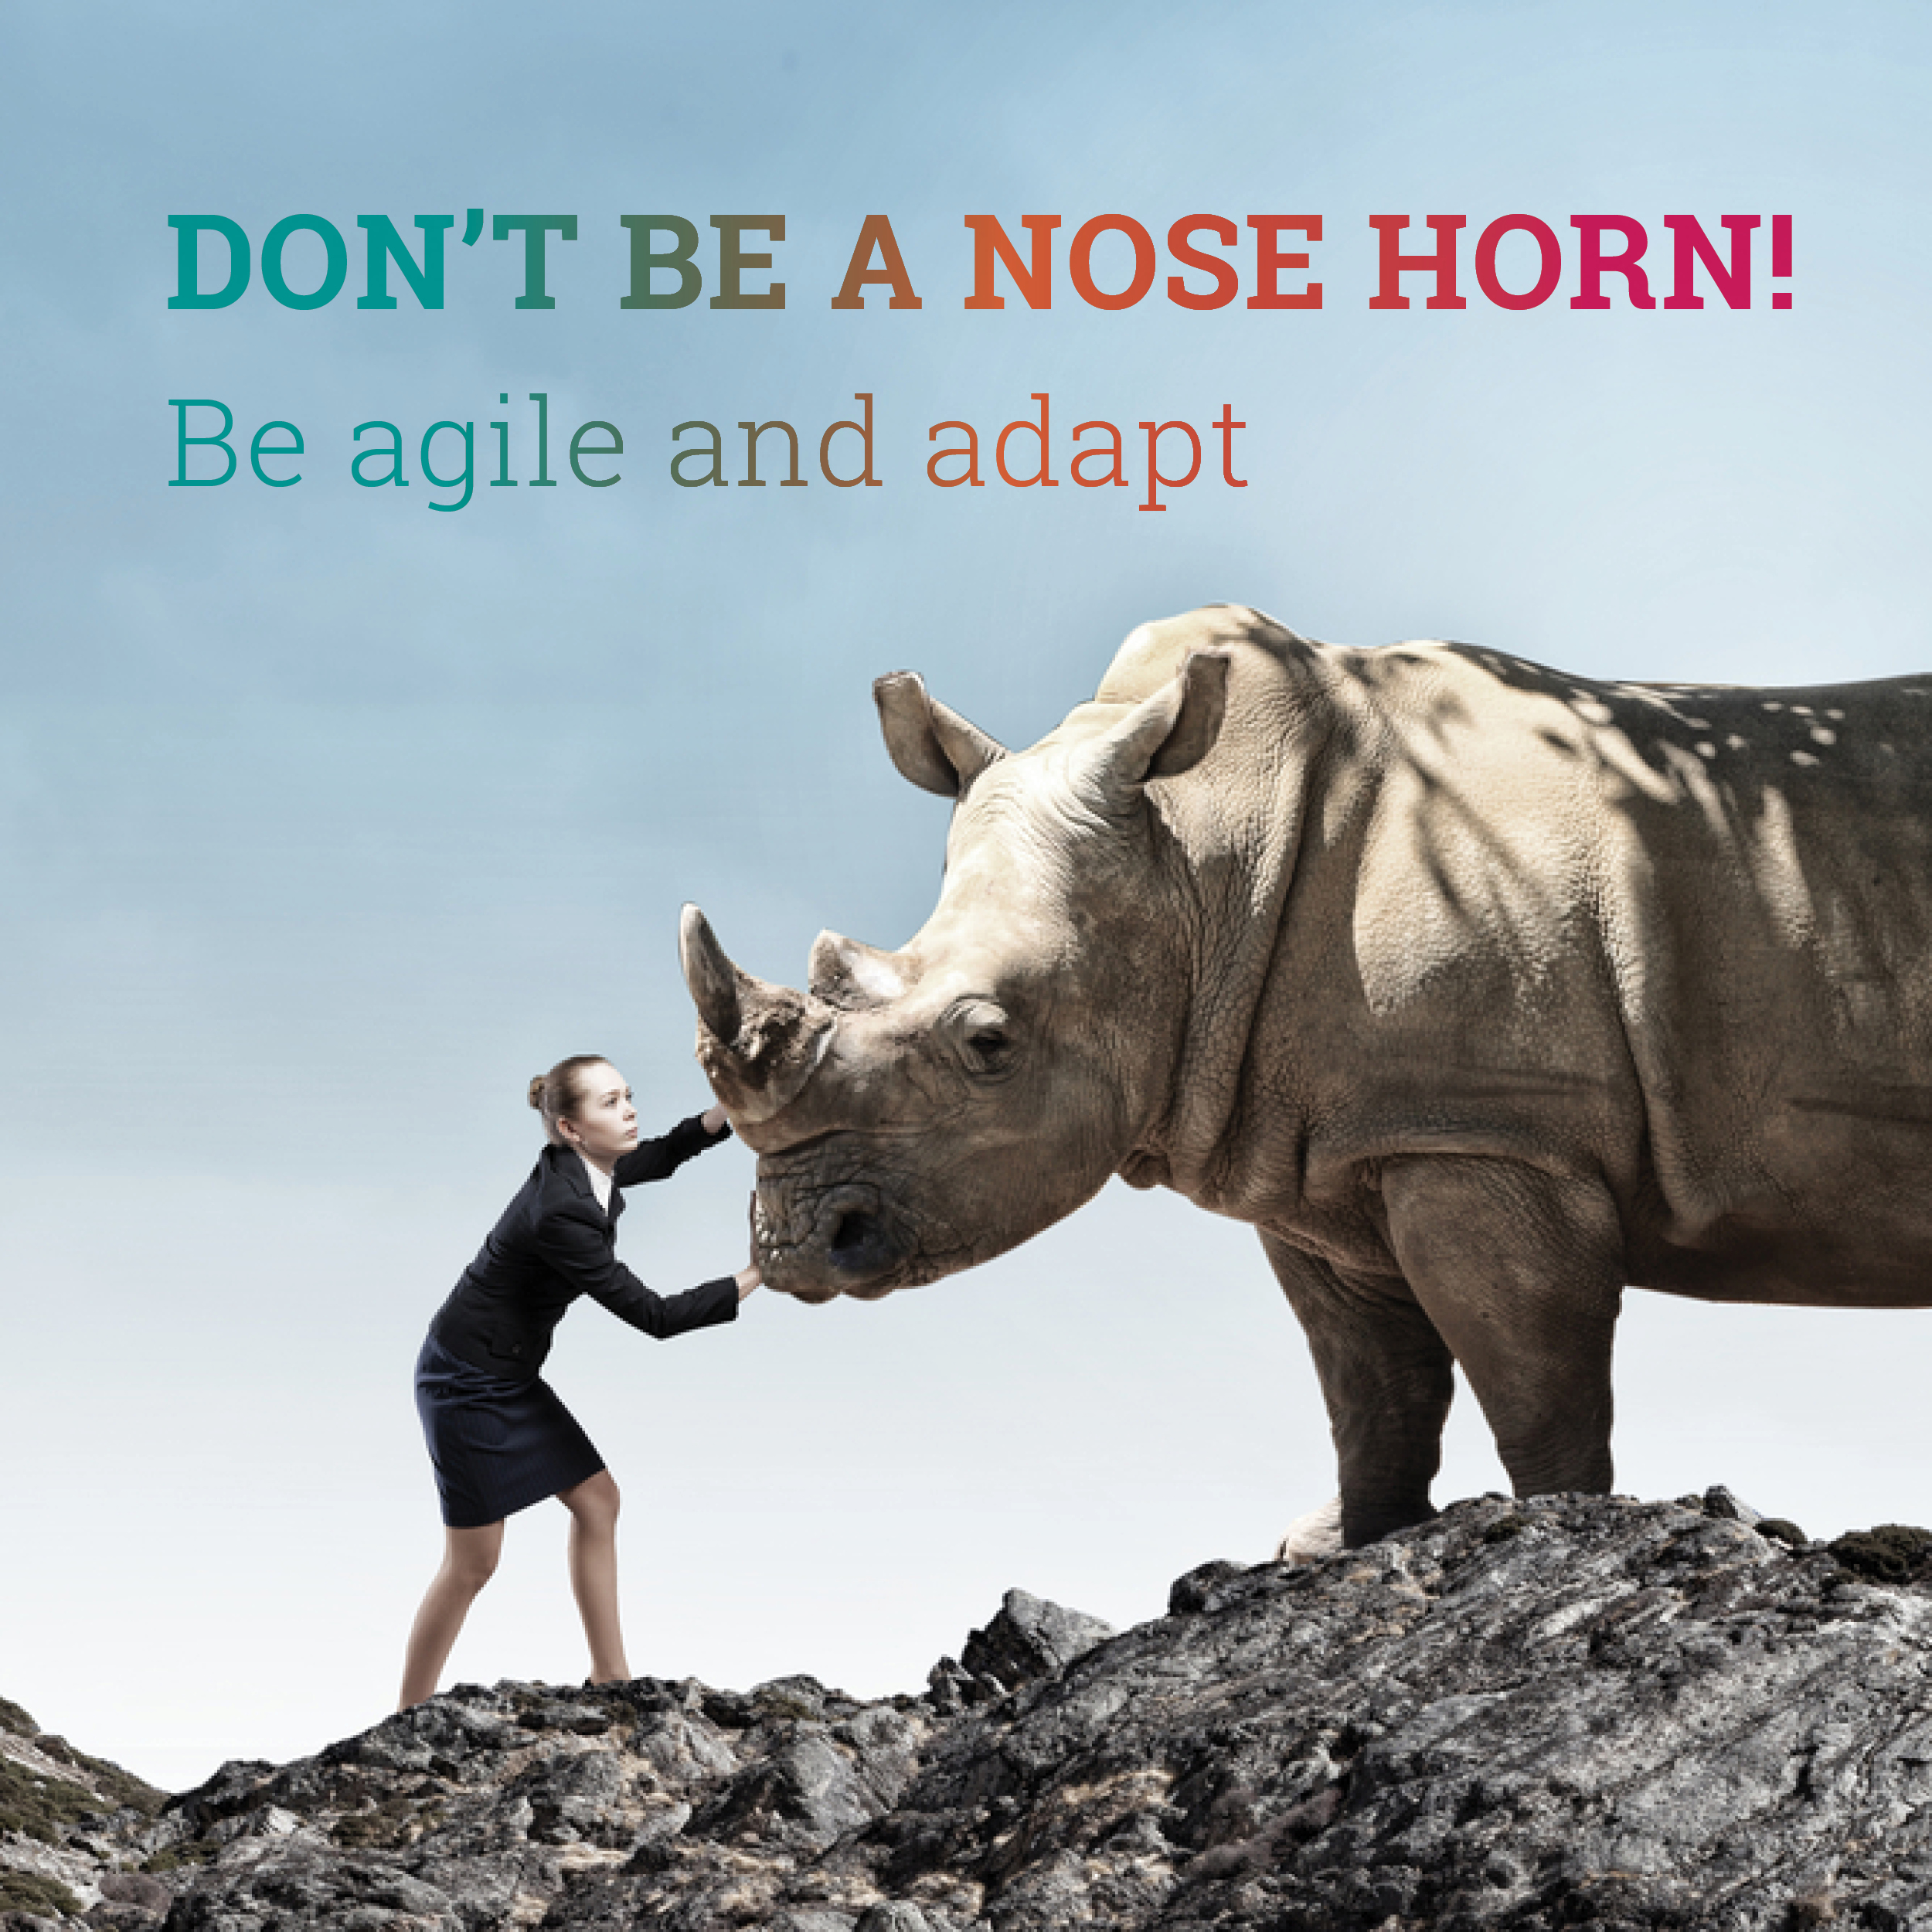 Don't be a nose horn!